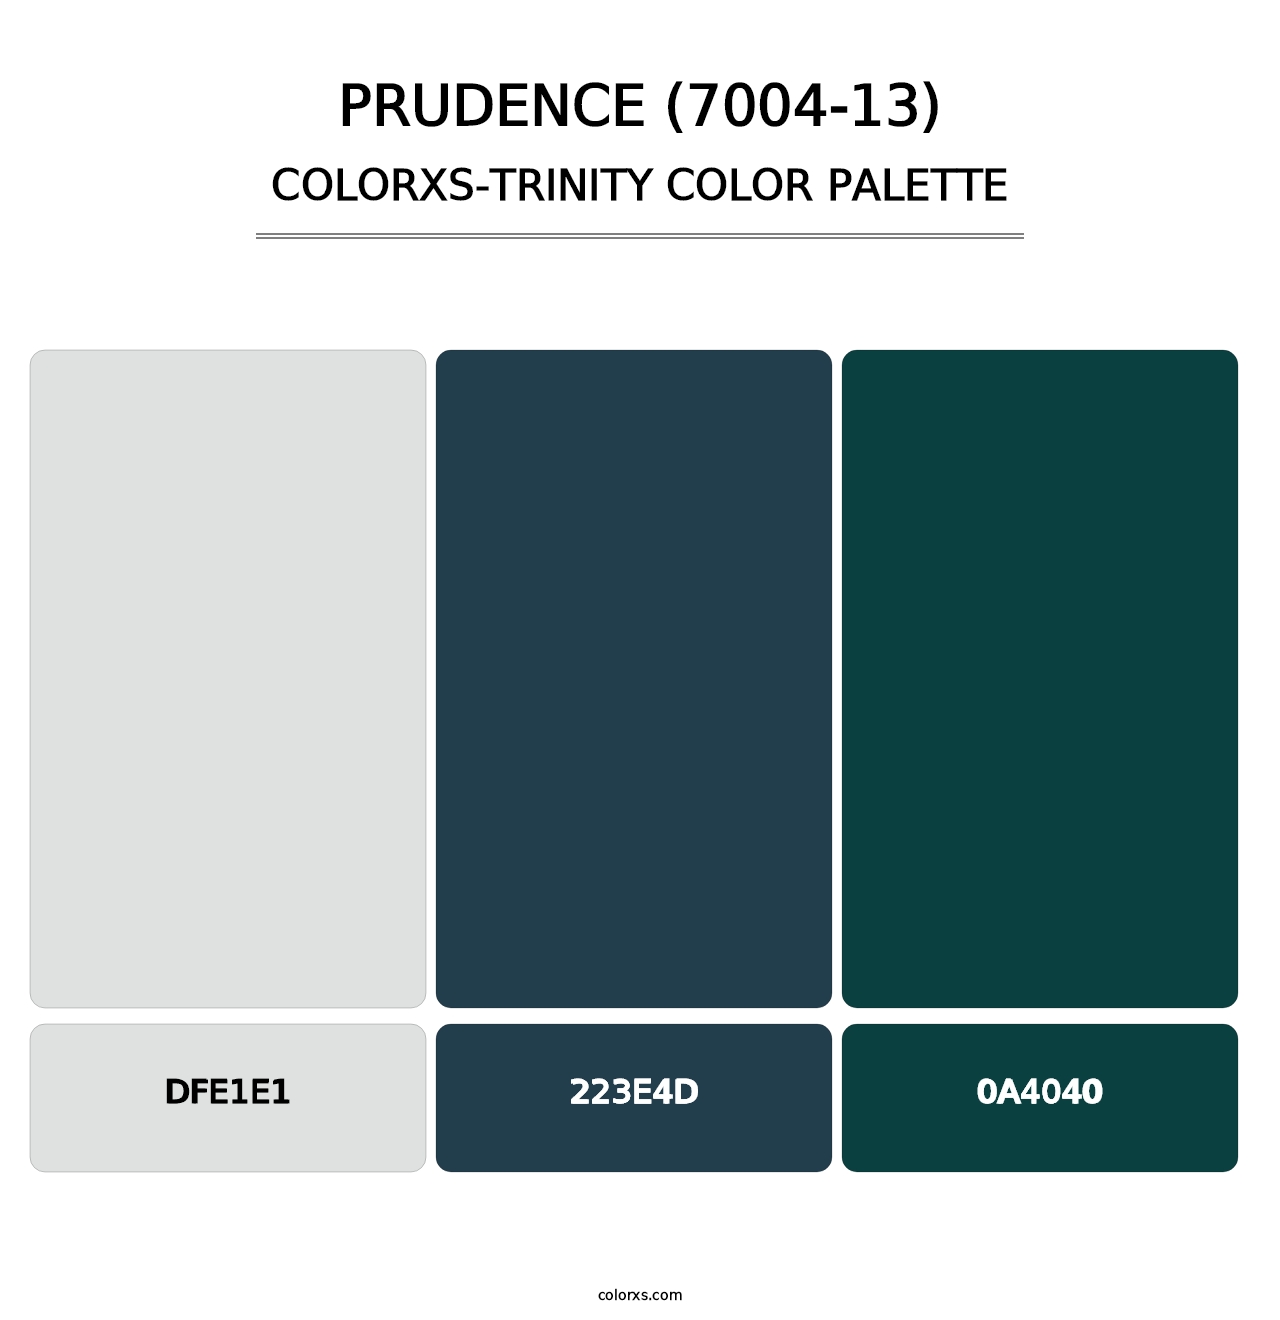 Prudence (7004-13) - Colorxs Trinity Palette